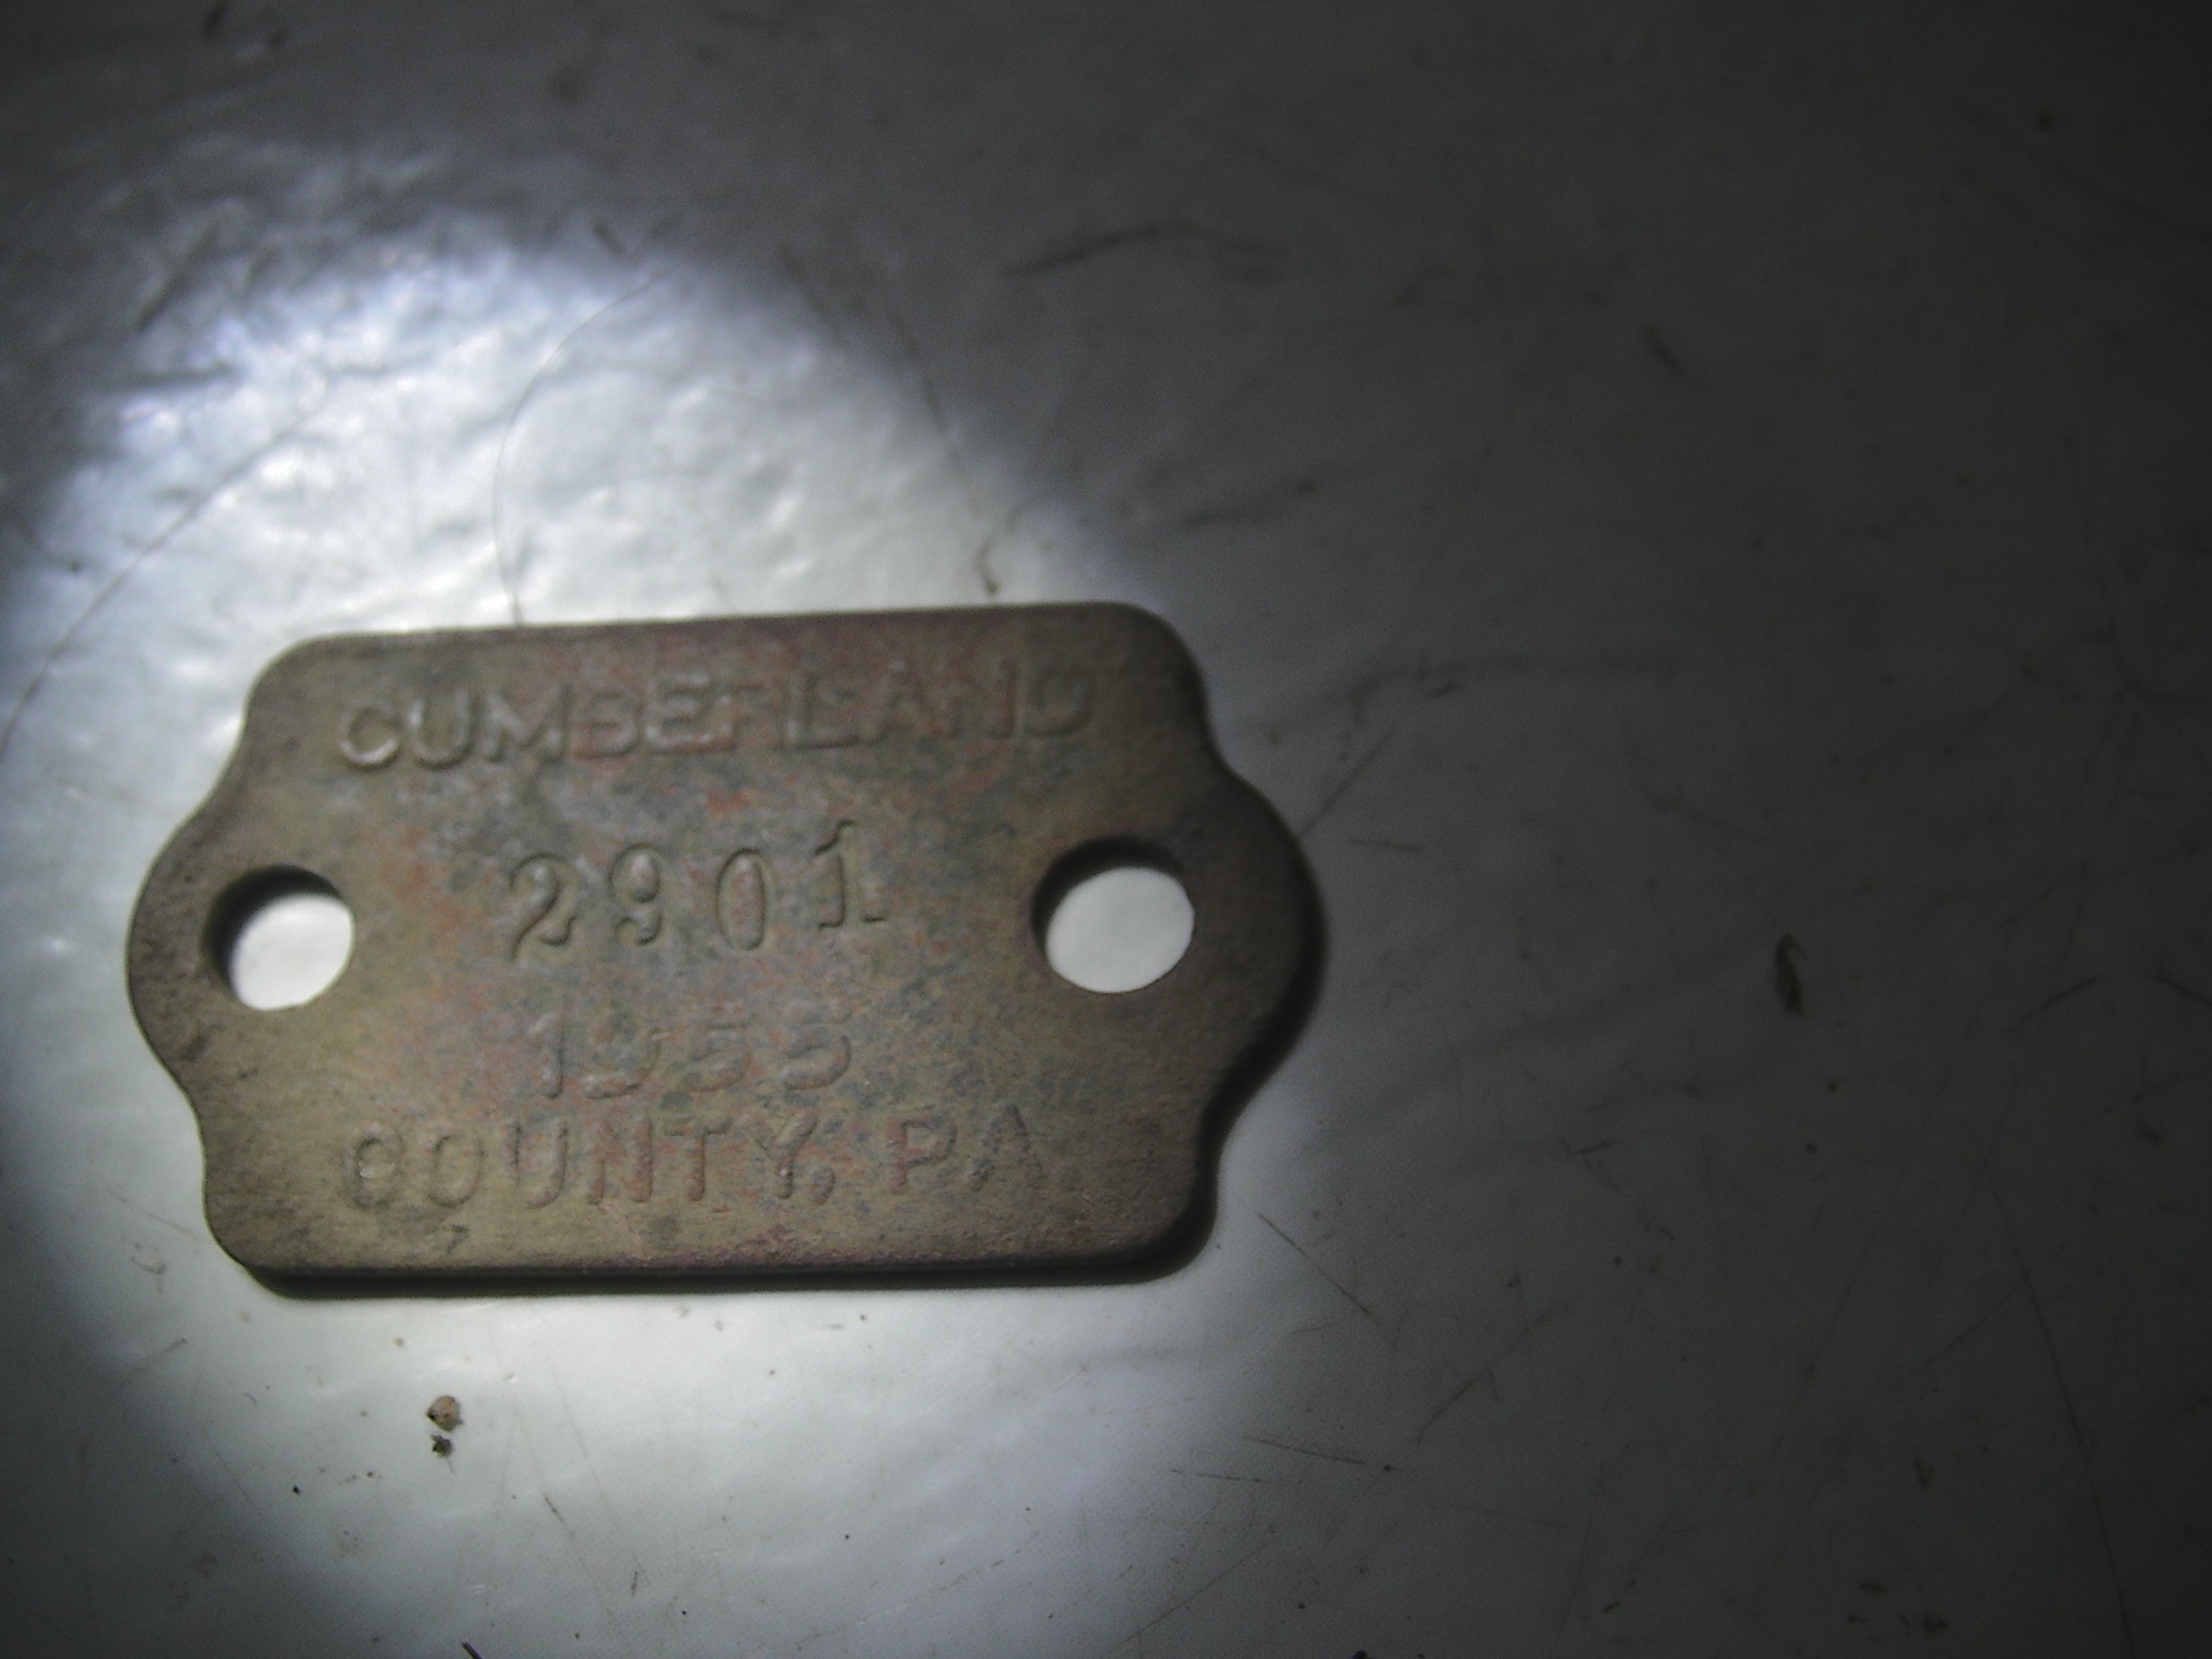 Dog tag from 1955